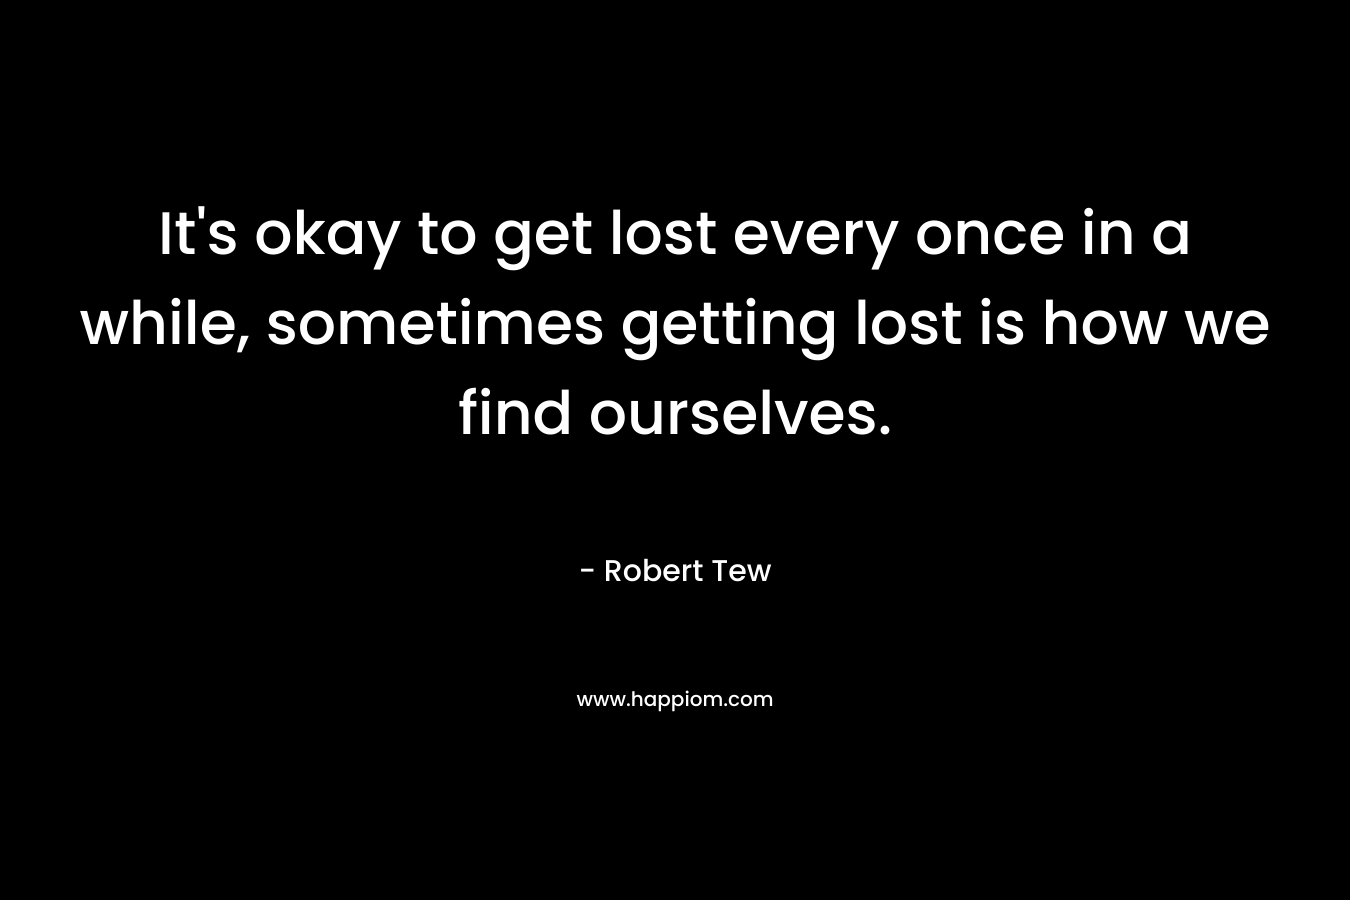 It's okay to get lost every once in a while, sometimes getting lost is how we find ourselves.